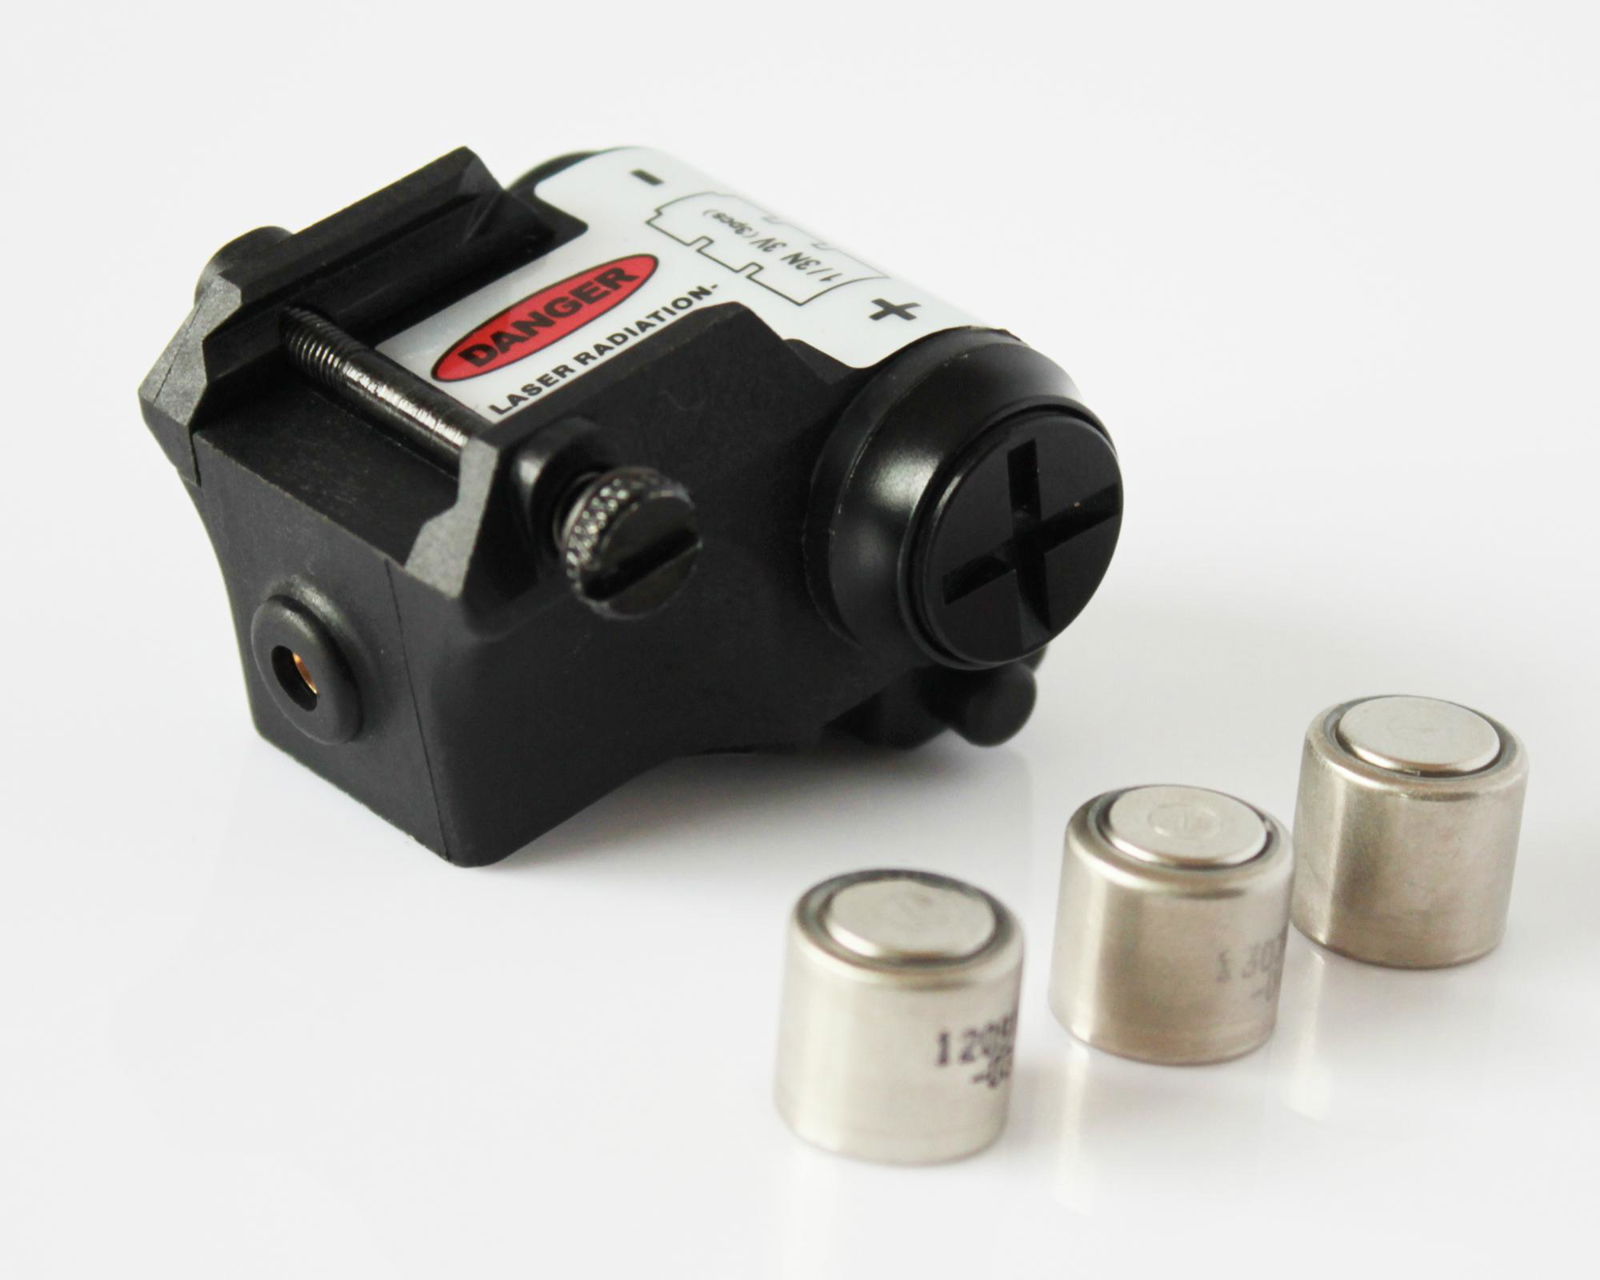 Subcompact green laser sight for pistol 5